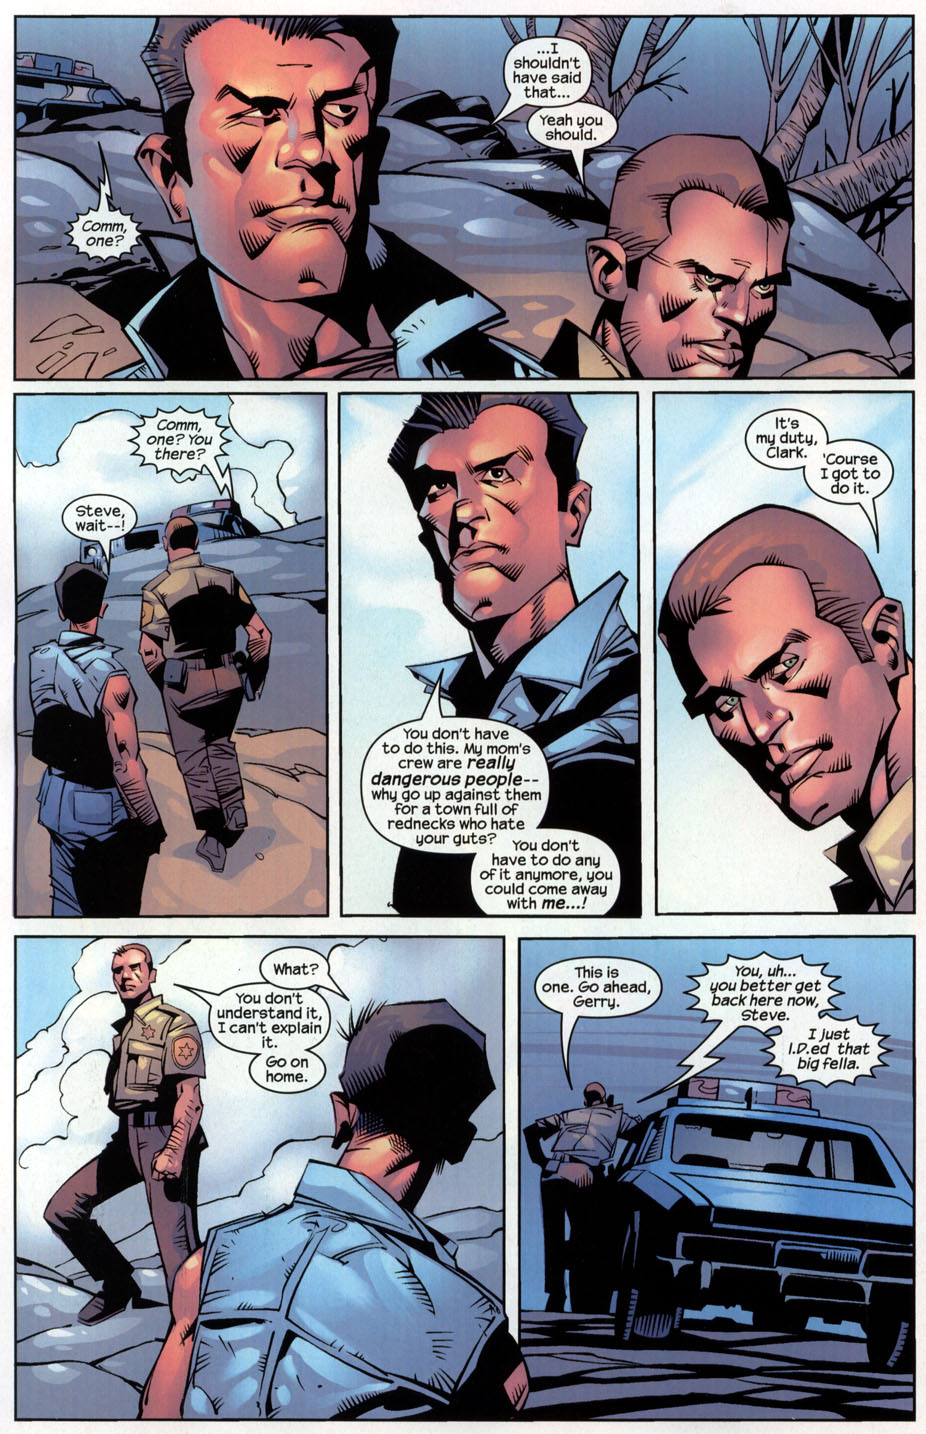 The Punisher (2001) issue 29 - Streets of Laredo #02 - Page 15